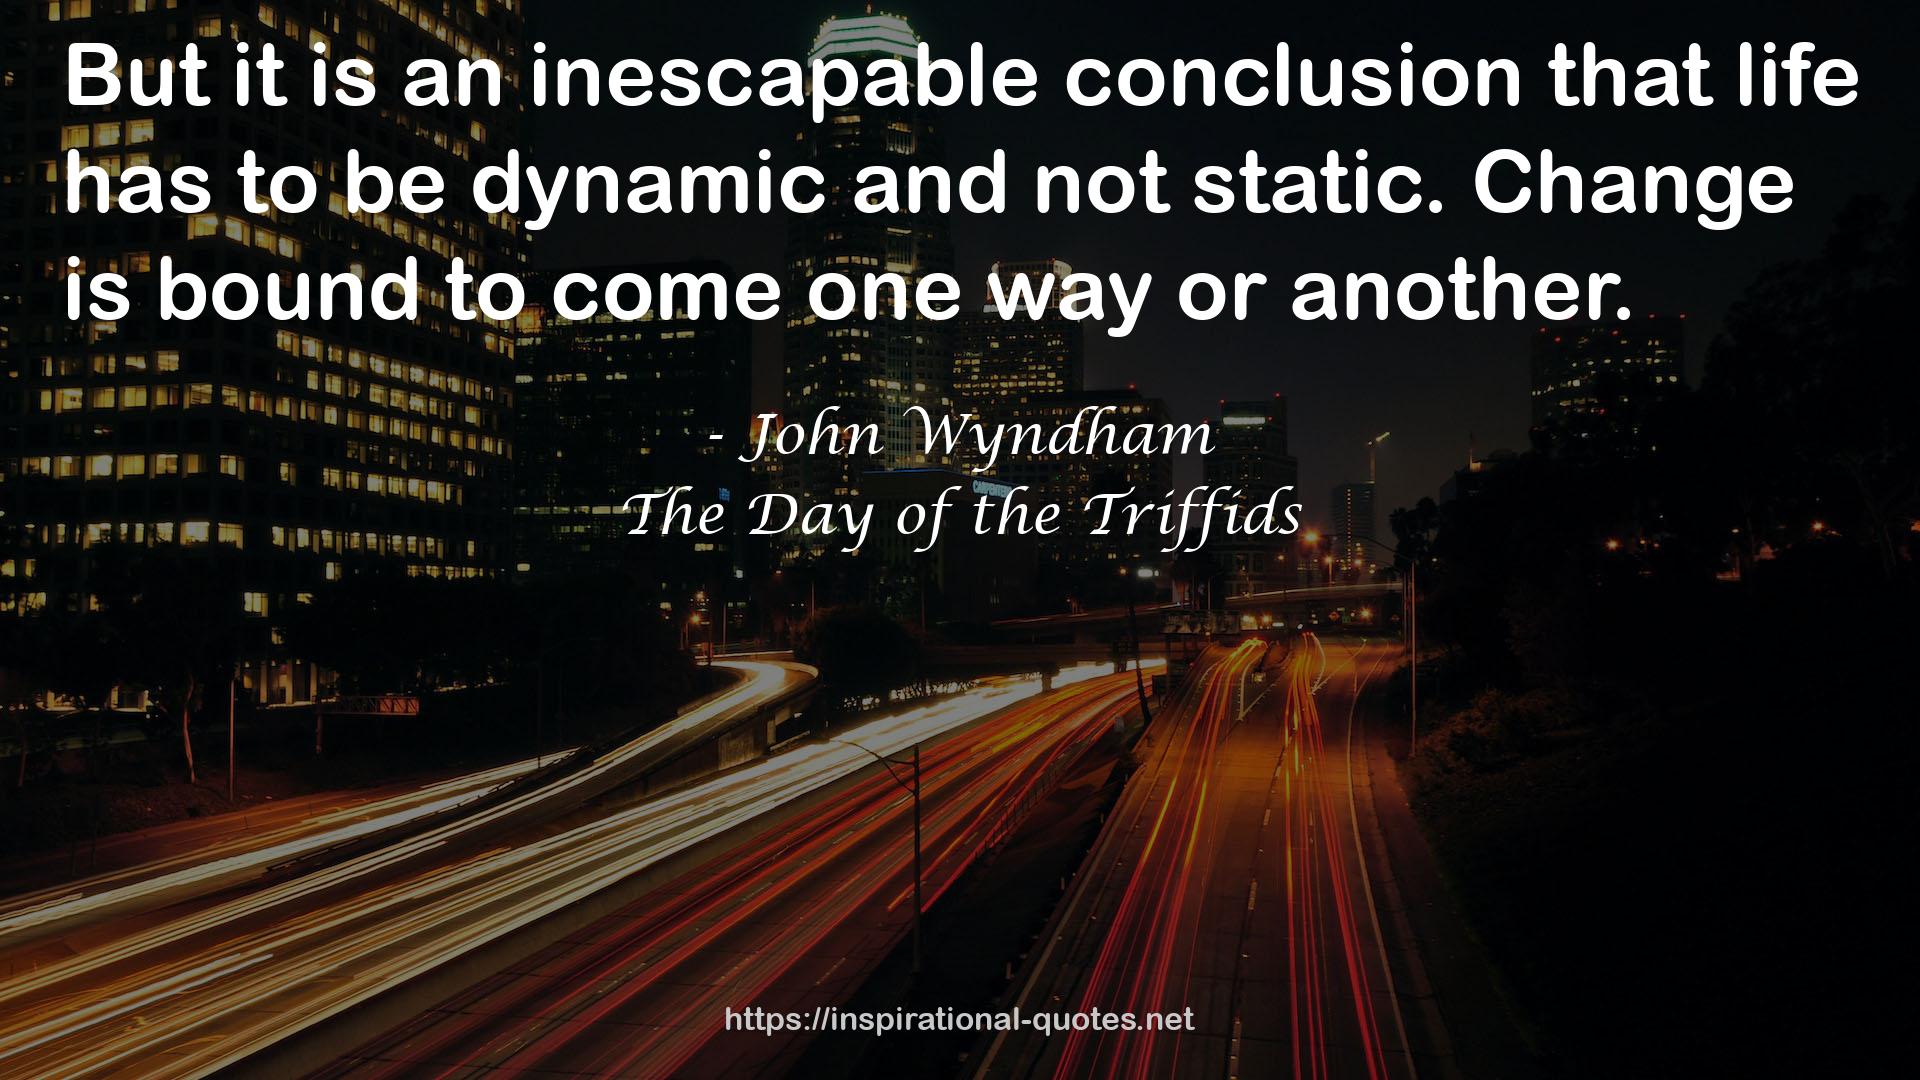 The Day of the Triffids QUOTES